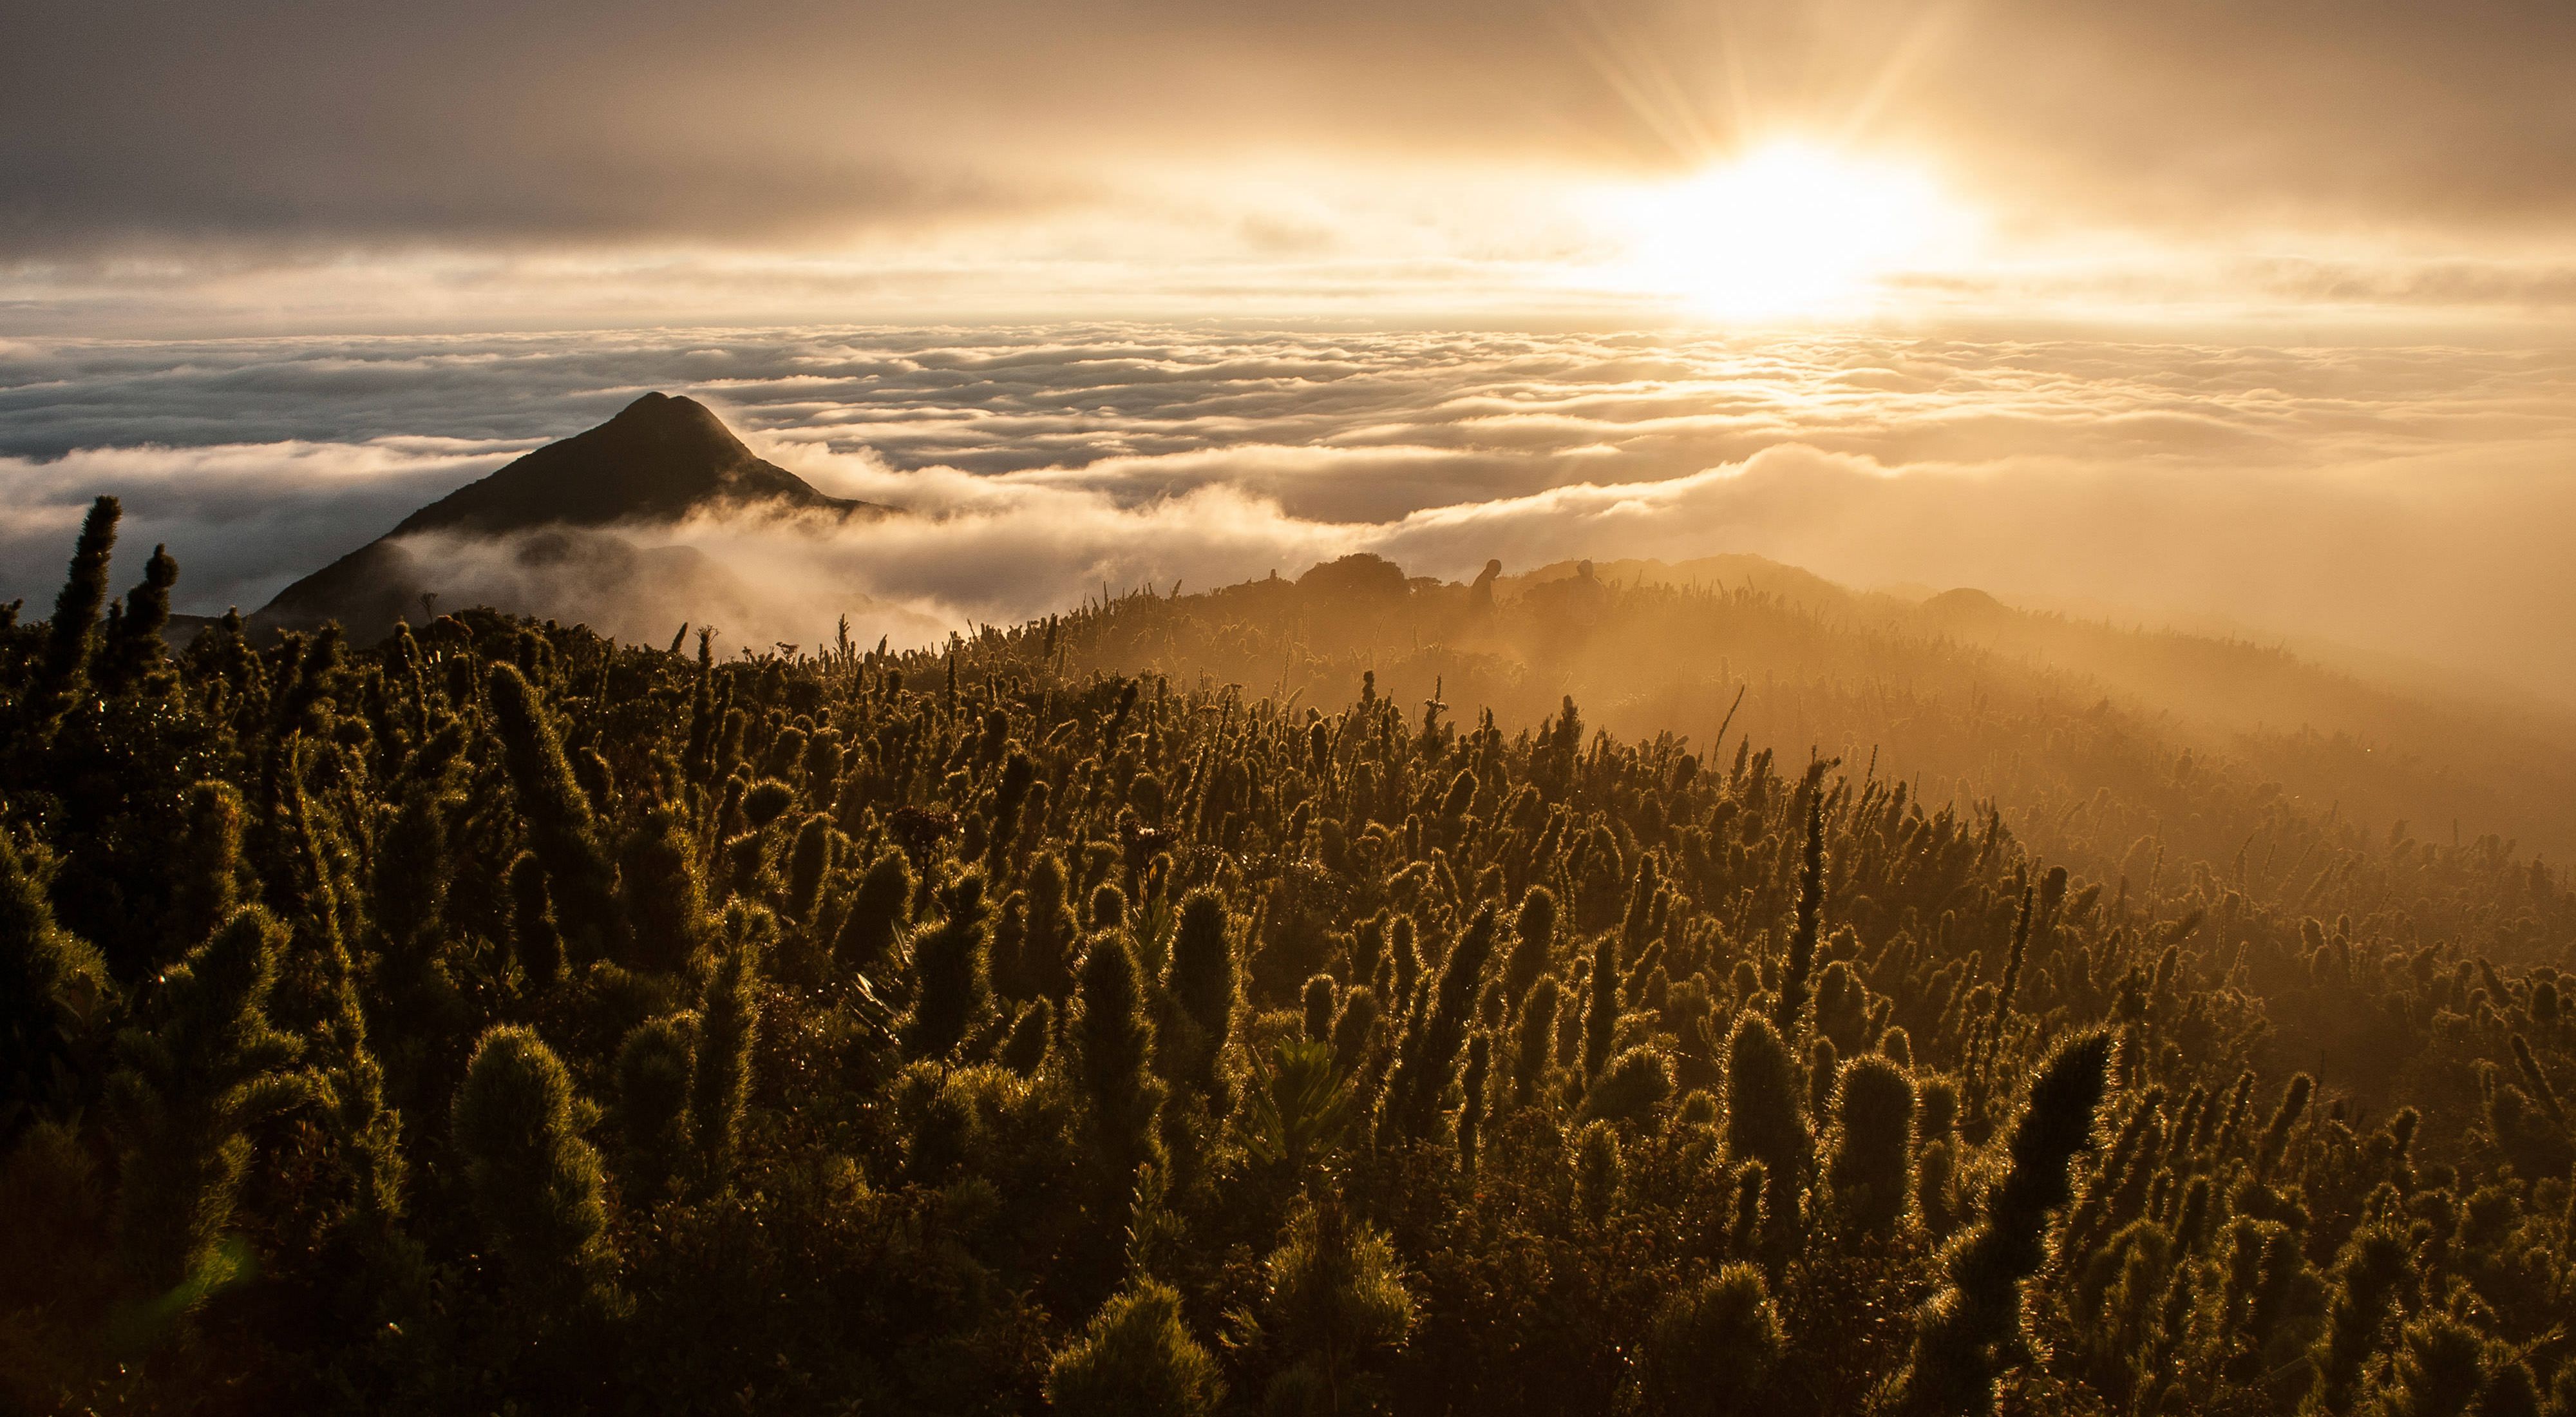 Sunrise above the high fields Caratuva, the south of Brazil's second highest mountain.